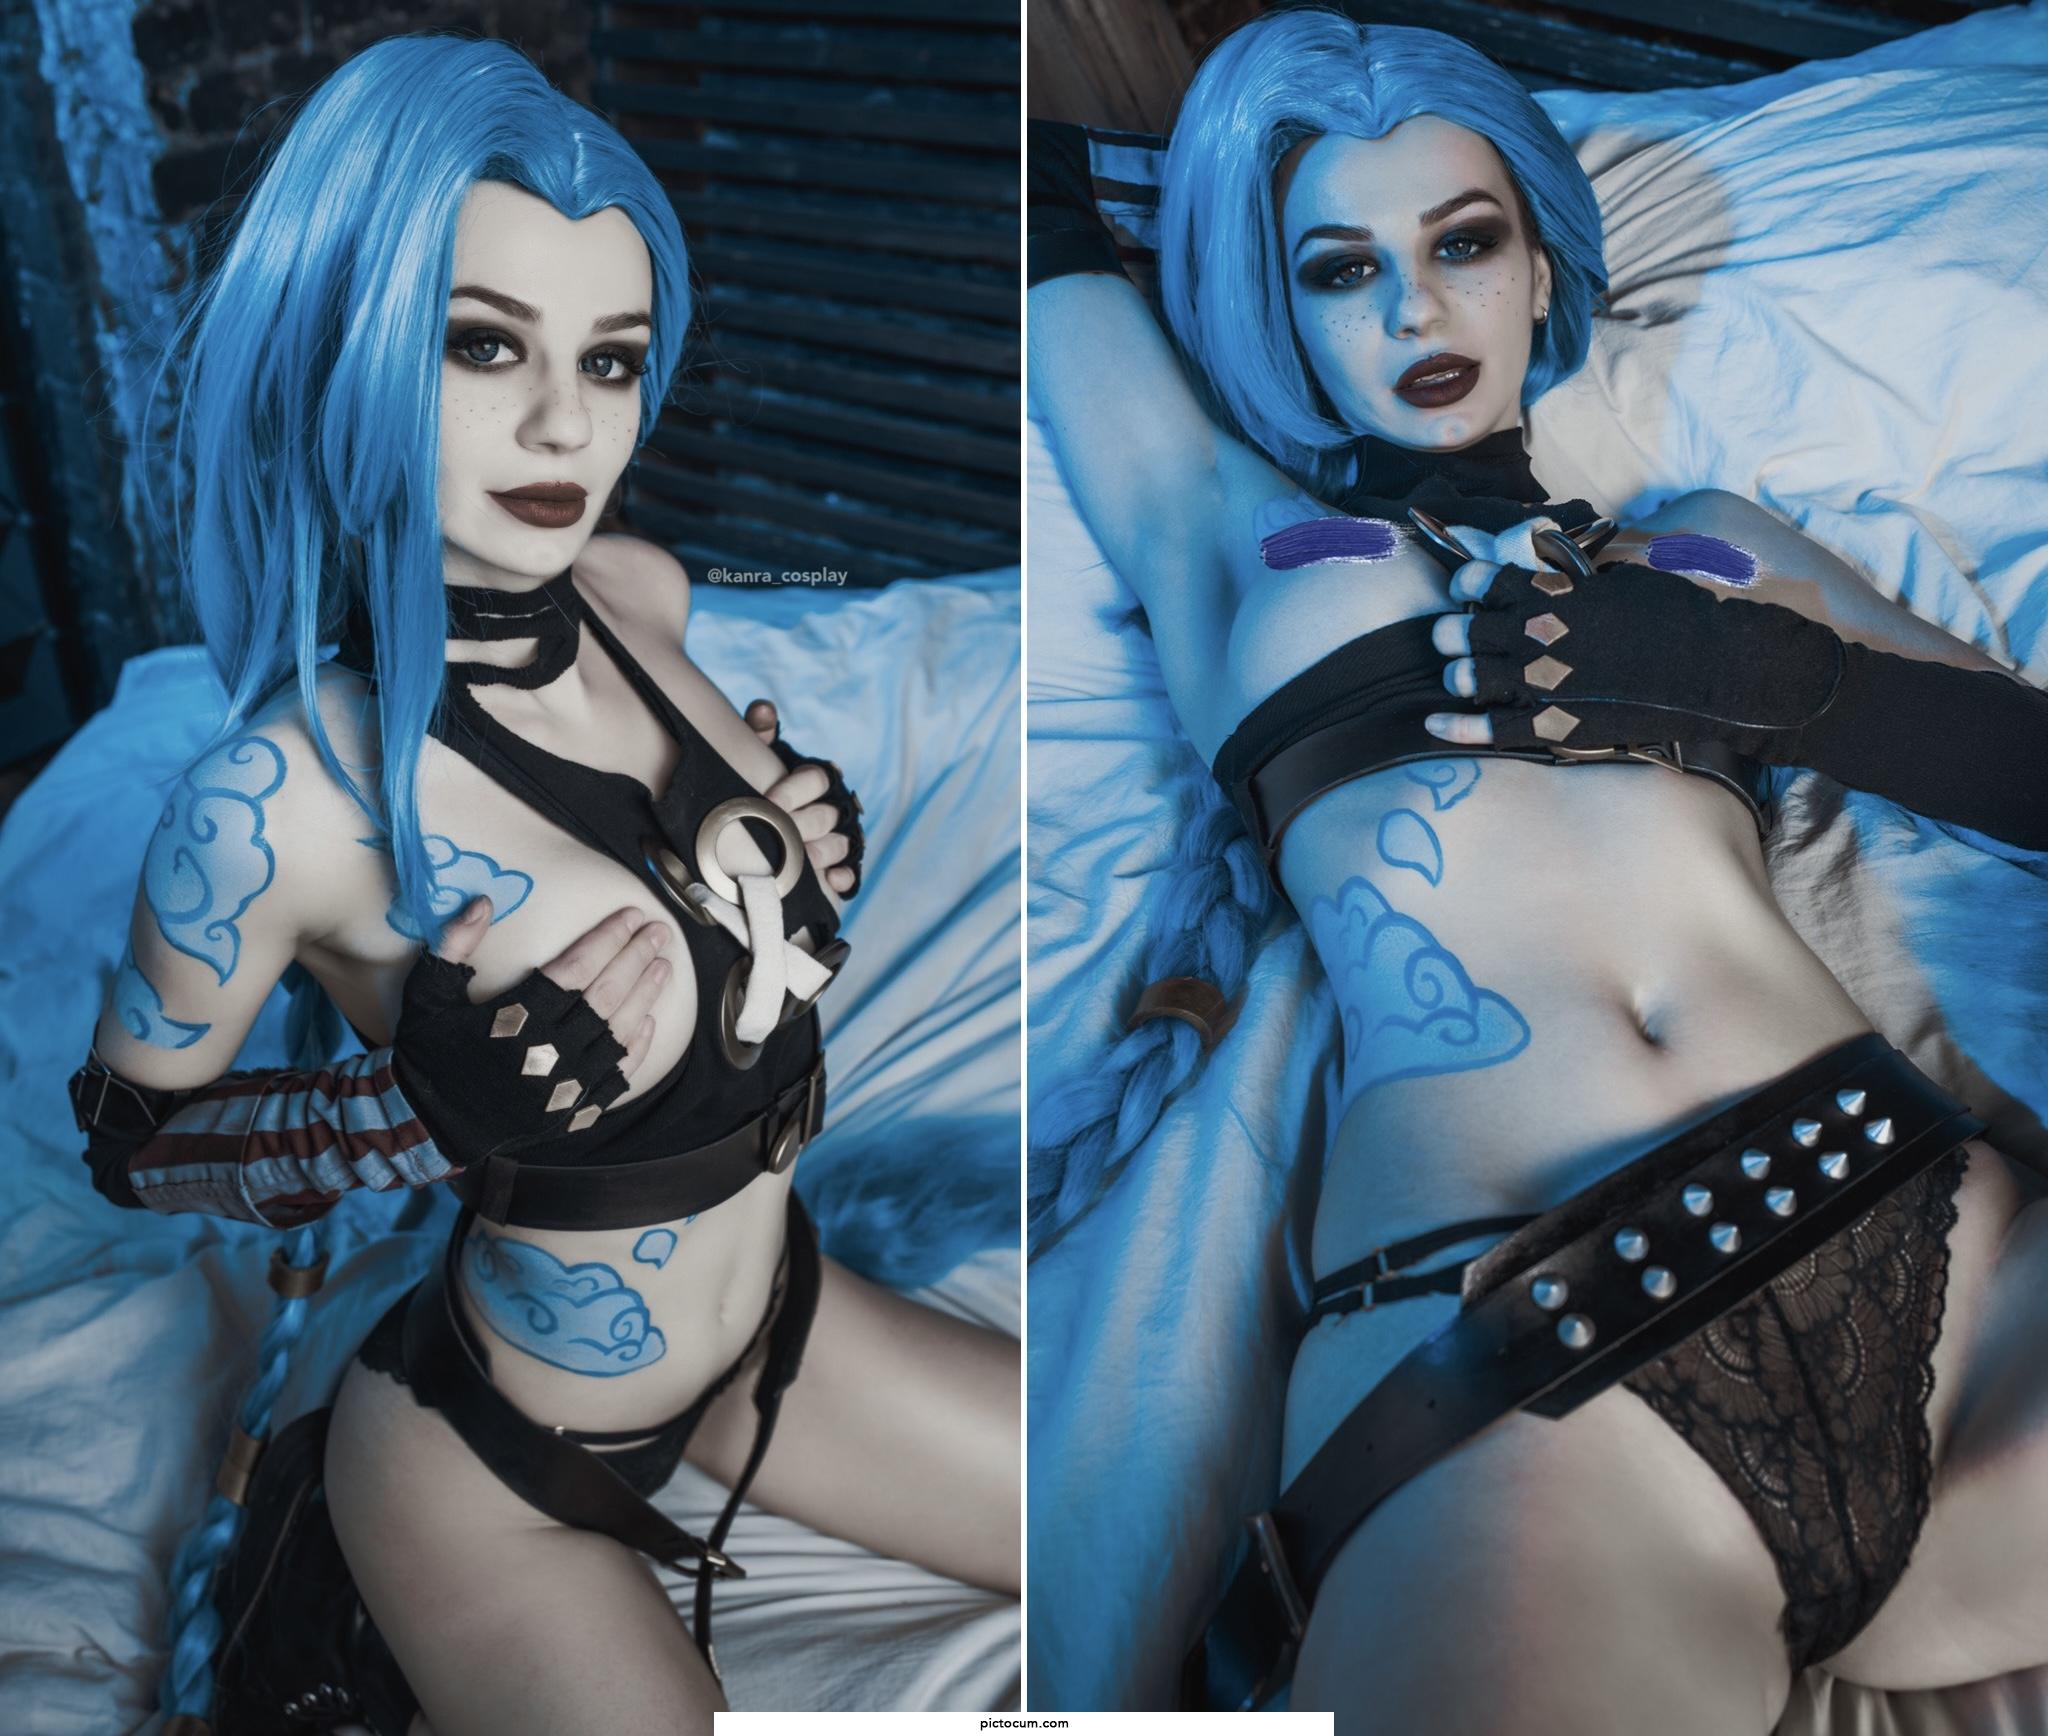 Jinx like to play dirty! by Kanra_cosplay